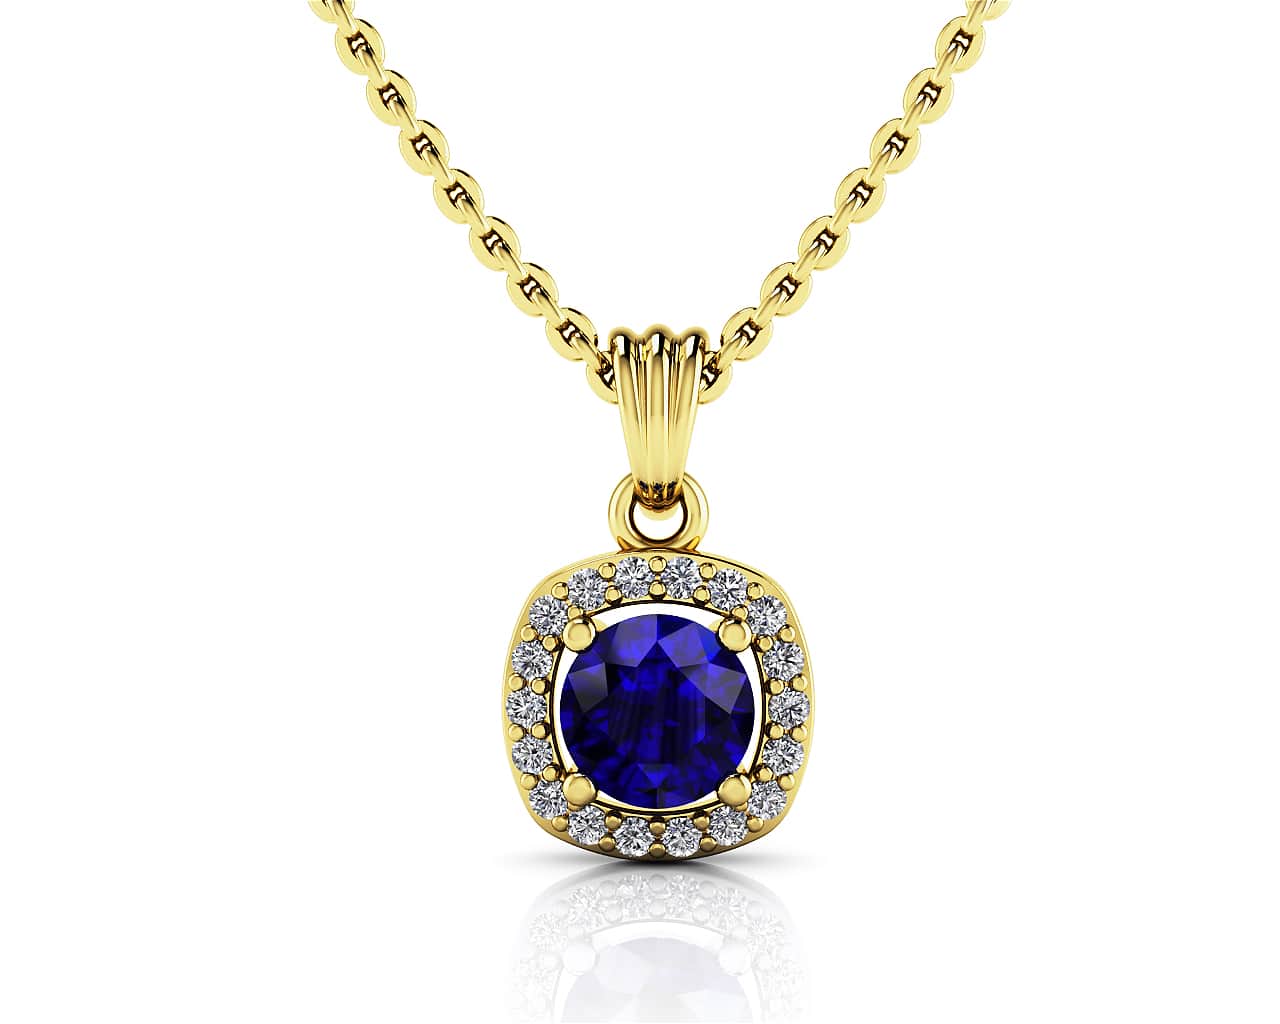 Everlasting Round Gemstone And Diamond Pendant Available In Gold Or Platinum